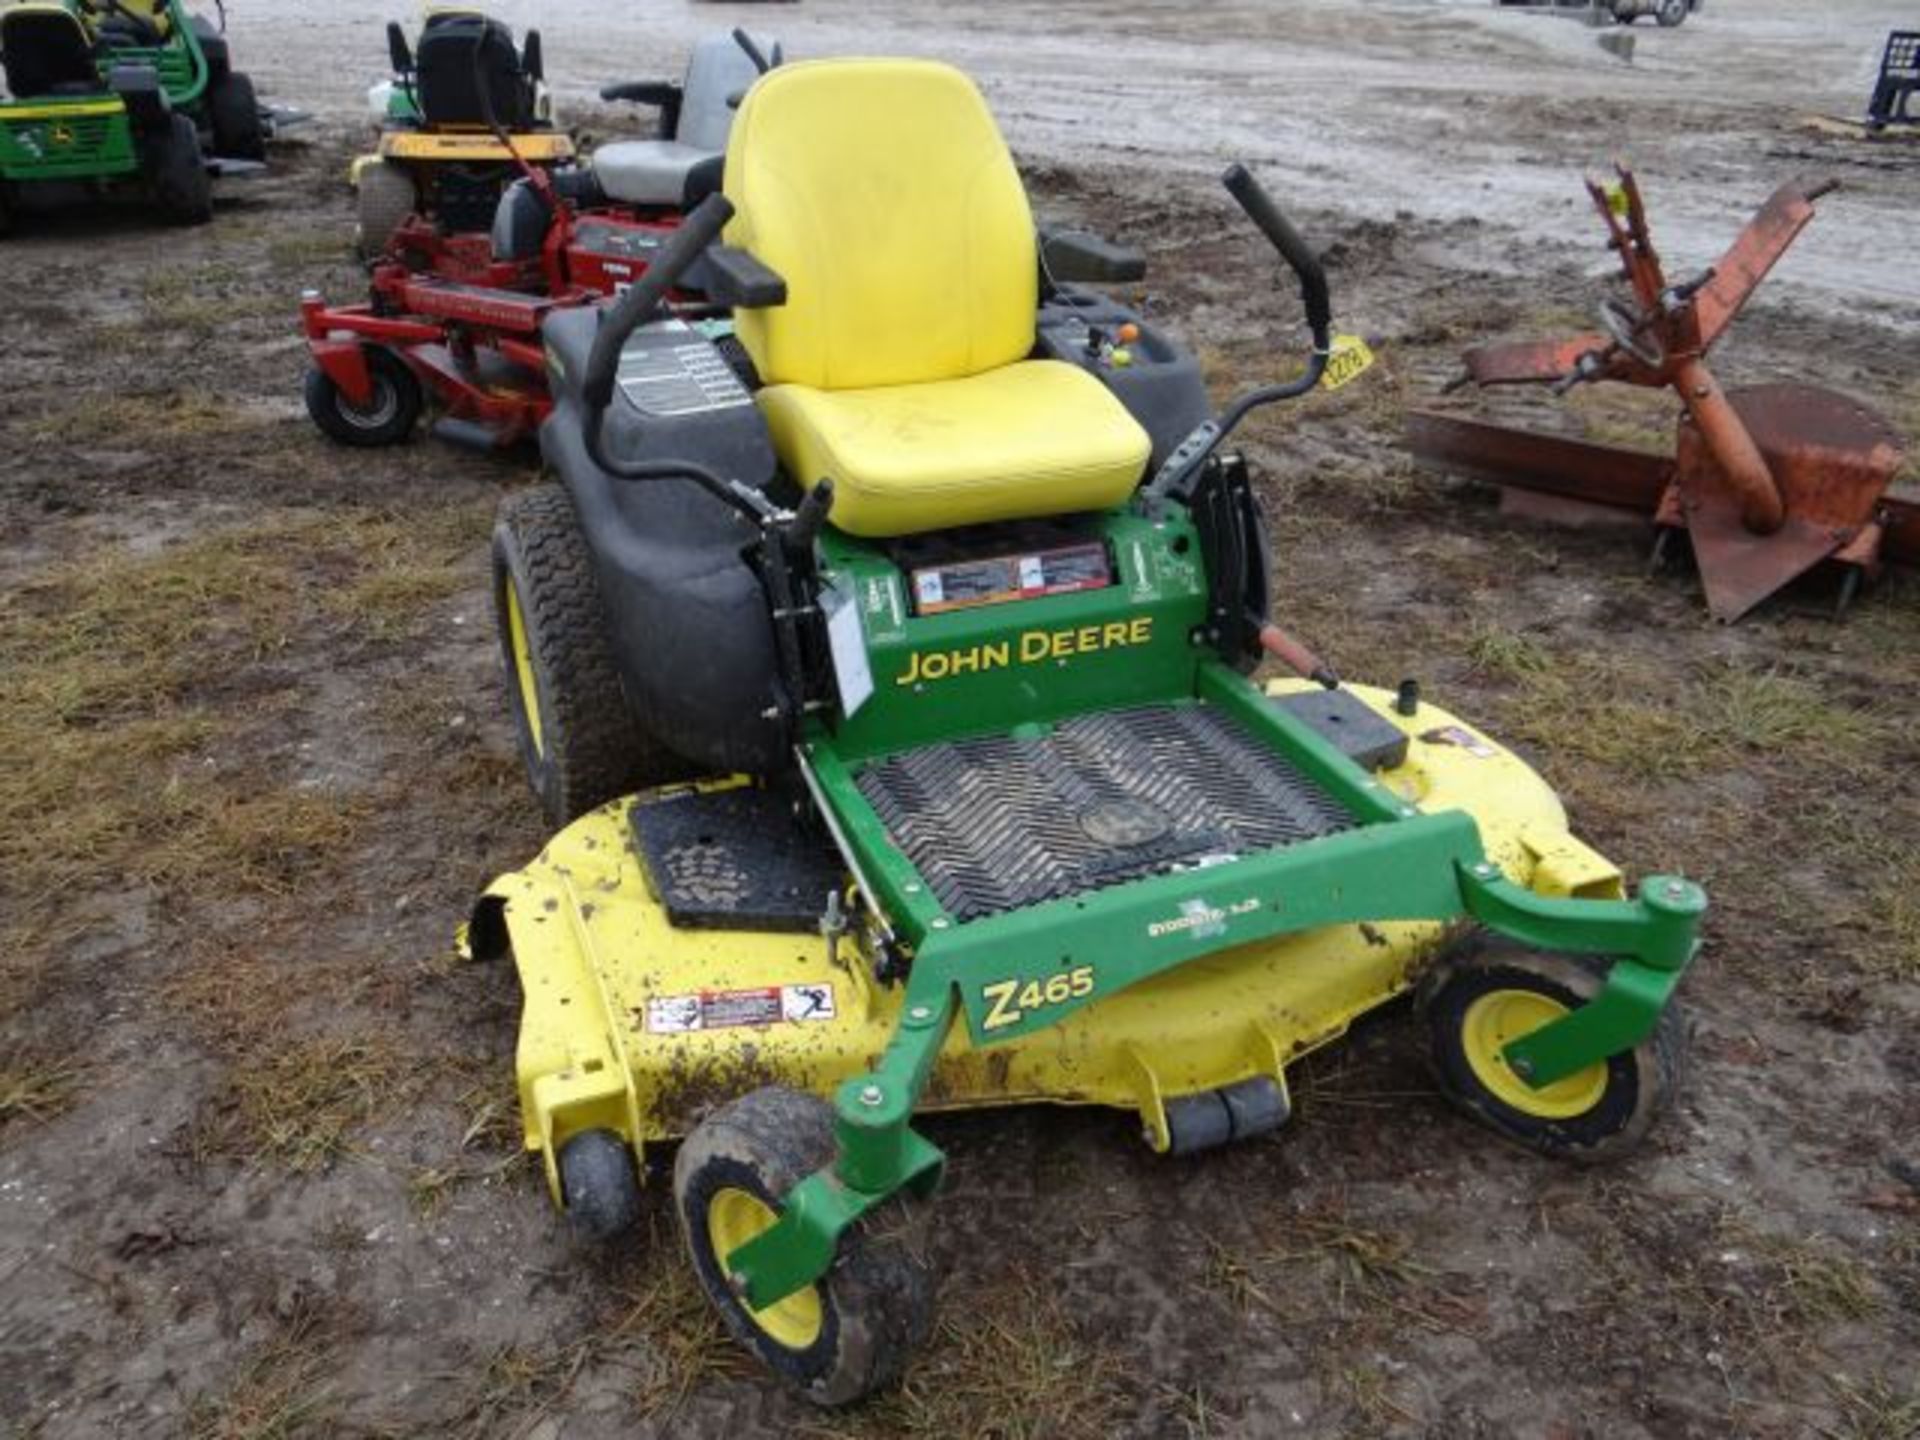 JD Z465 Riding Mower, 2010 #57582, 208 hrs, 62" Deck - Image 3 of 3